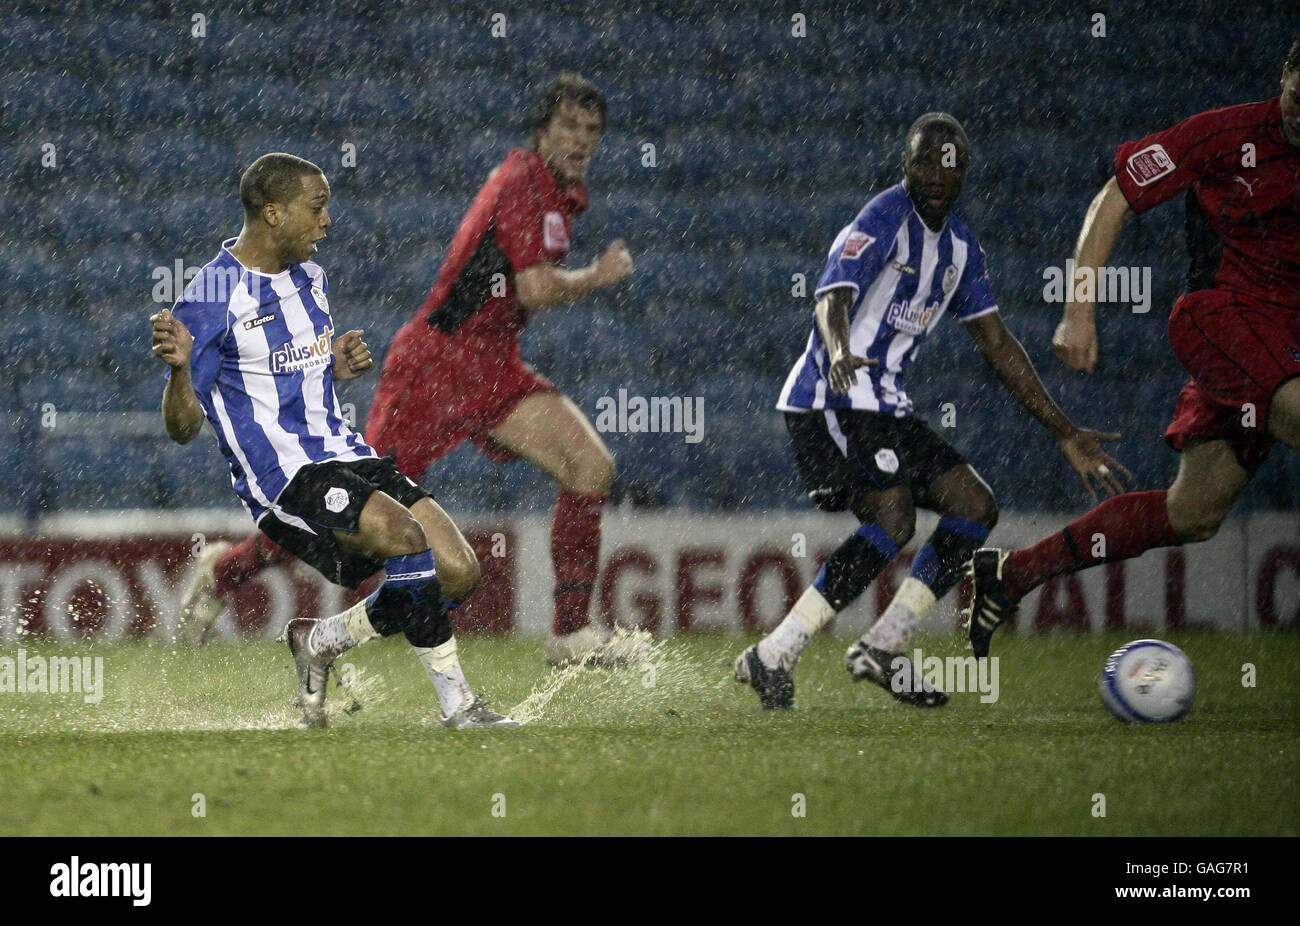 Sheffield Wednesday's Wade Small tries to pass on the soaked pitch during the Coca-Cola League Championship match at Hillsborough, Sheffield. Stock Photo